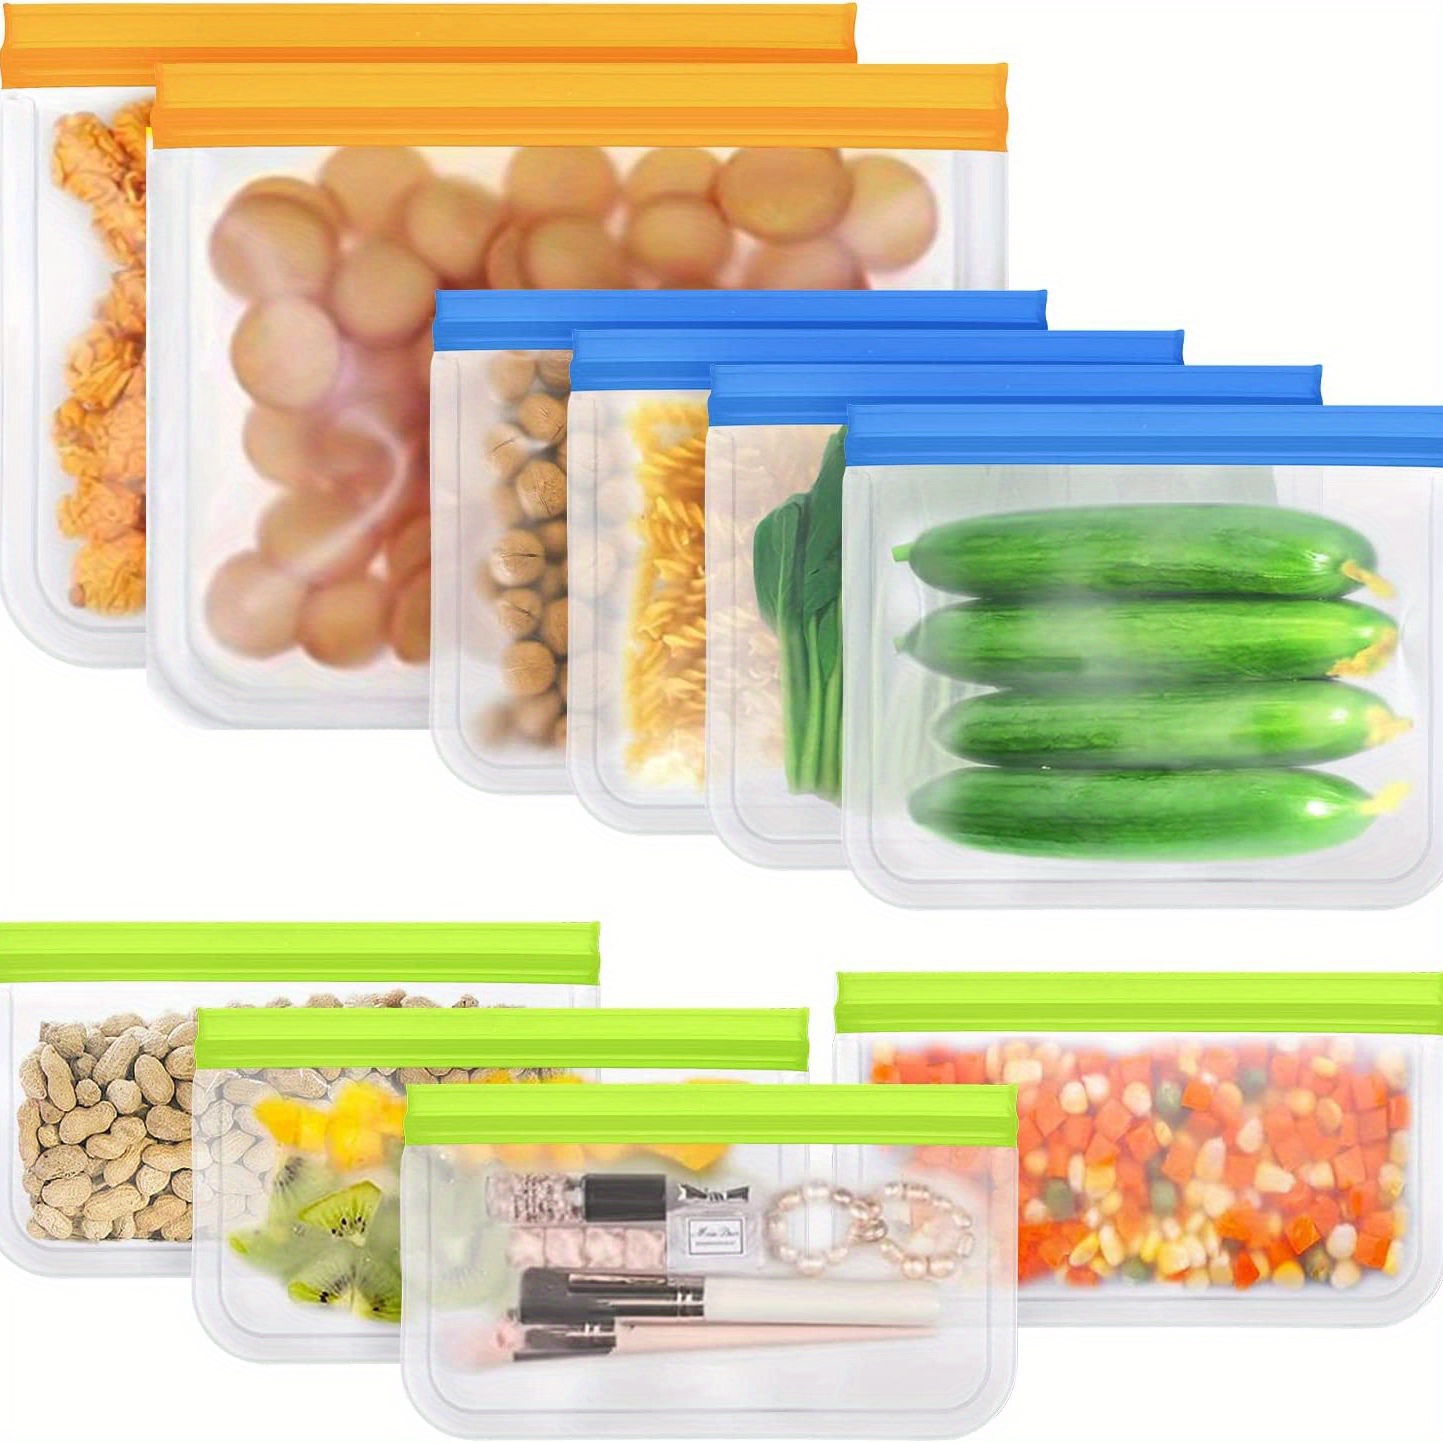 10pcs BPA-Free Reusable Food Storage Bags - Leakproof Snack and Sandwich  Bags for Lunch, Marinating, and Keeping Food Fresh - Wishupon